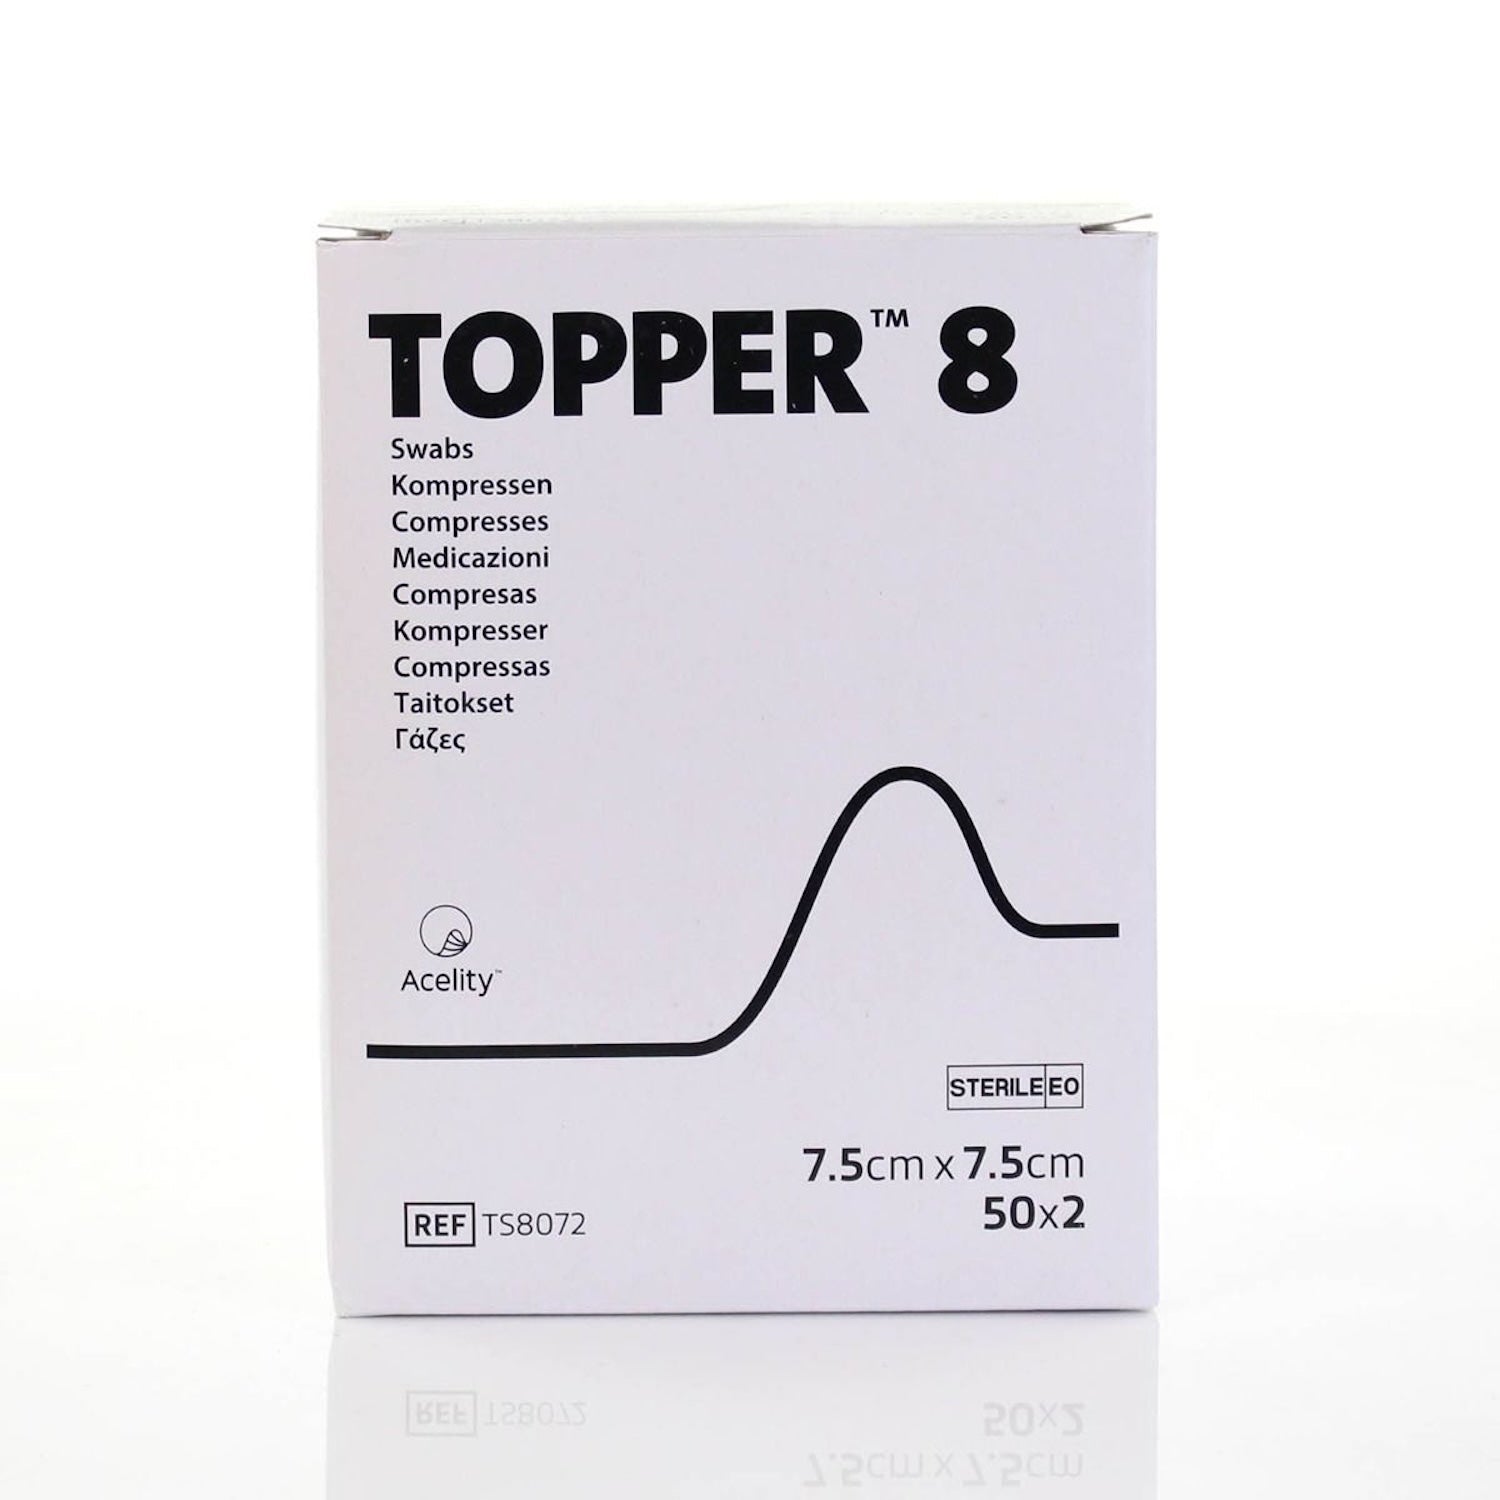 Topper 8 Gauze Swabs | Sterile | 7.5 x 7.5cm | Pack of 50 x 2